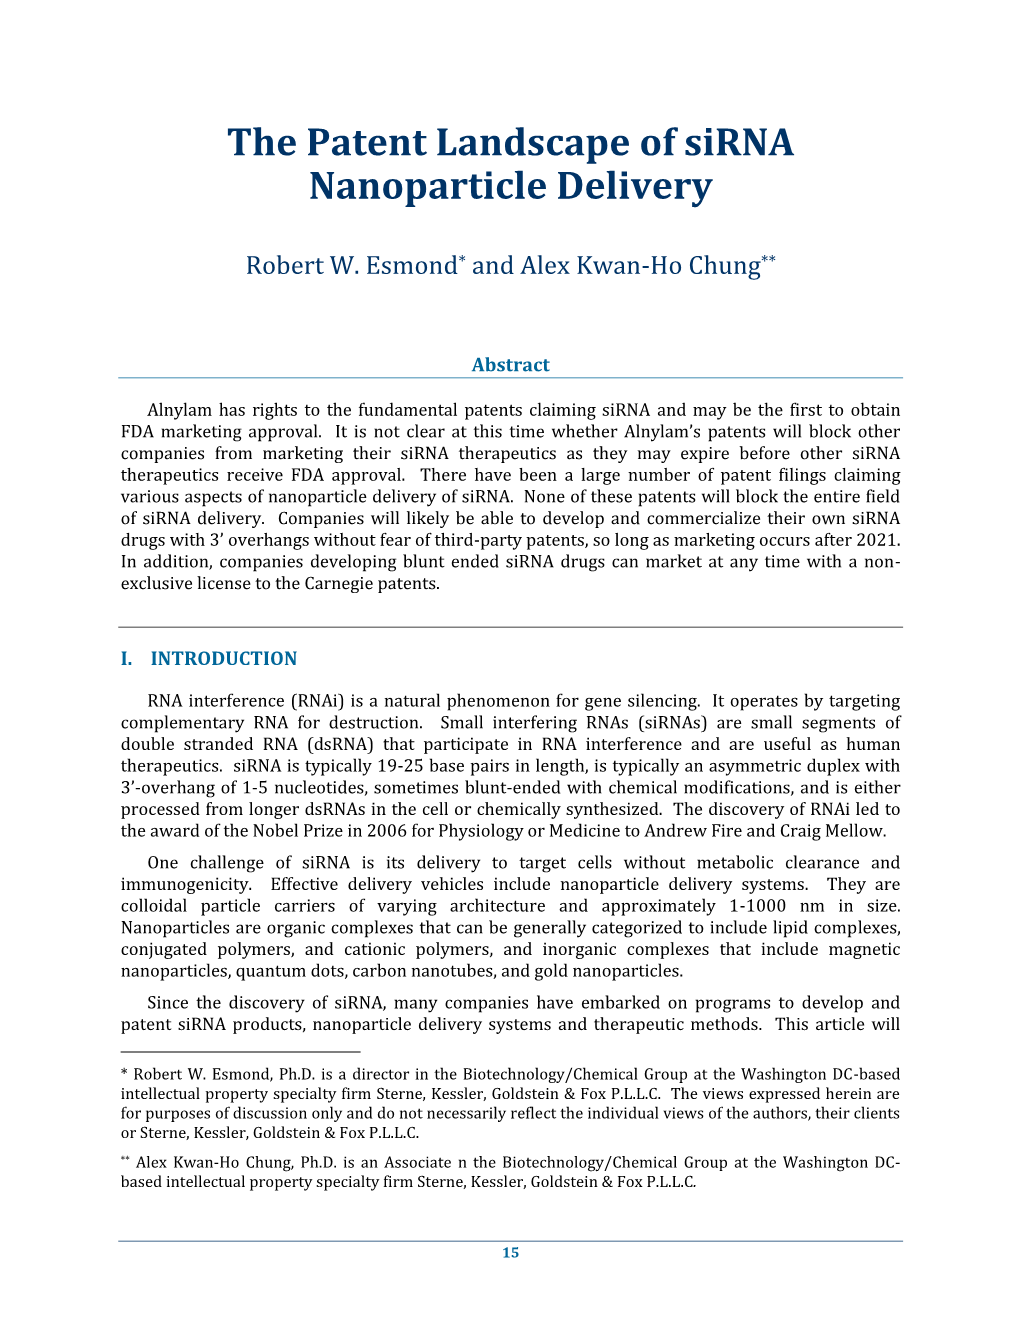 The Patent Landscape of Sirna Nanoparticle Delivery